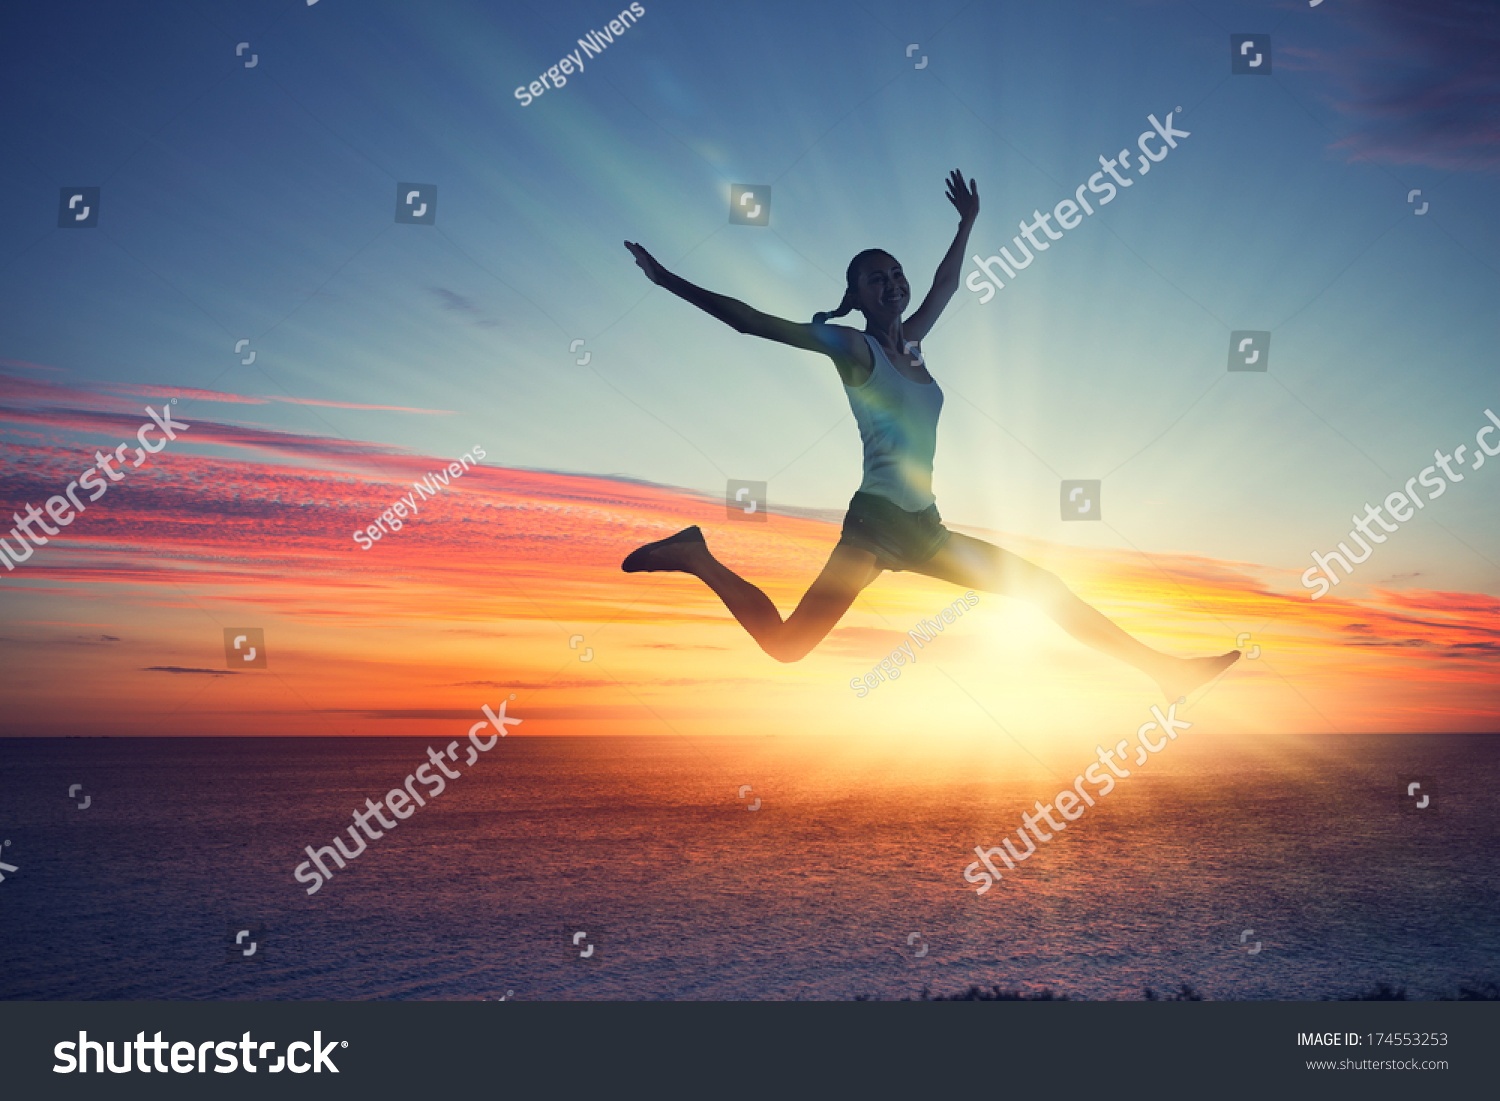 Silhouette of dancer jumping against city in lights of sunrise #174553253